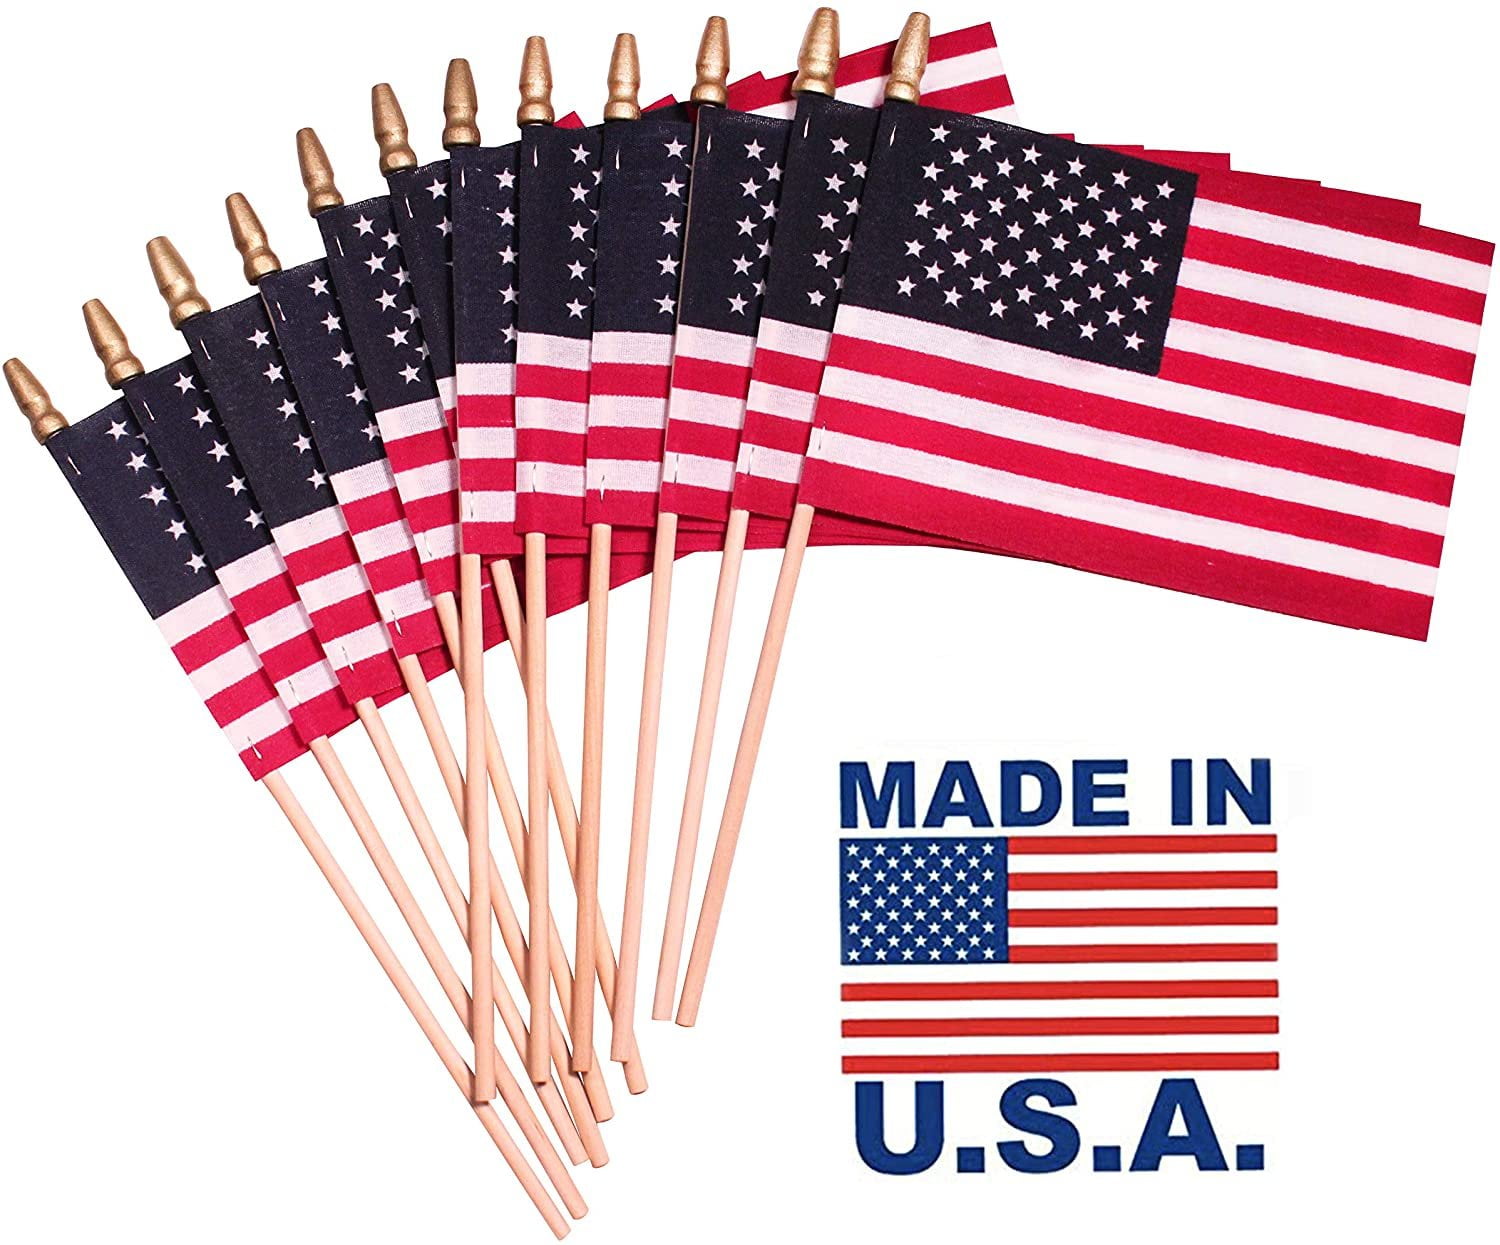 Lot of 12 American Stick Flag.12" X 8" SEWN EDGE Wood Tip USA Made Memorial Day 